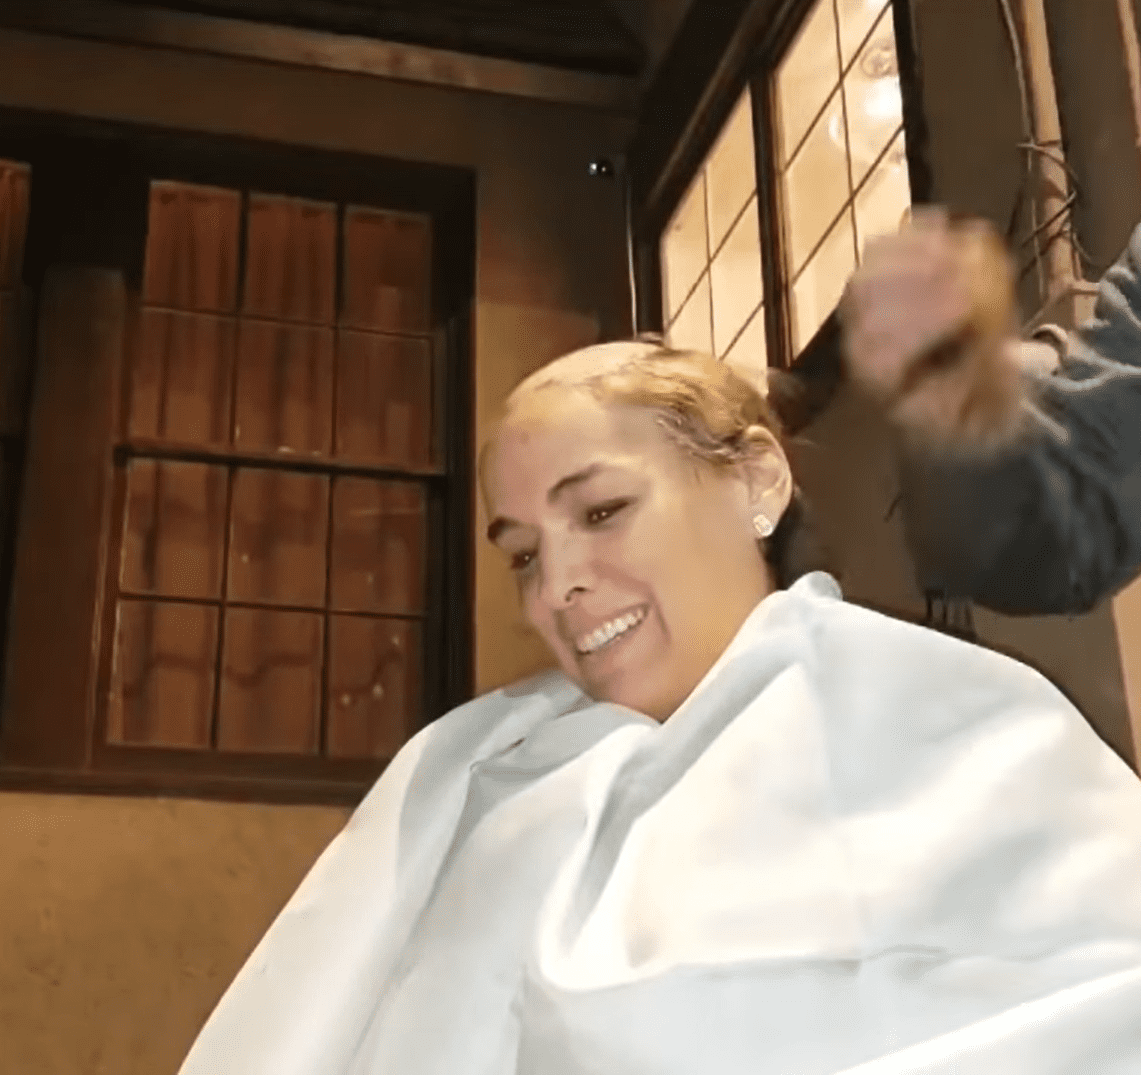 Joanna McPherson having her hair shaved off. │Source: youtube.com/Inside Edition 